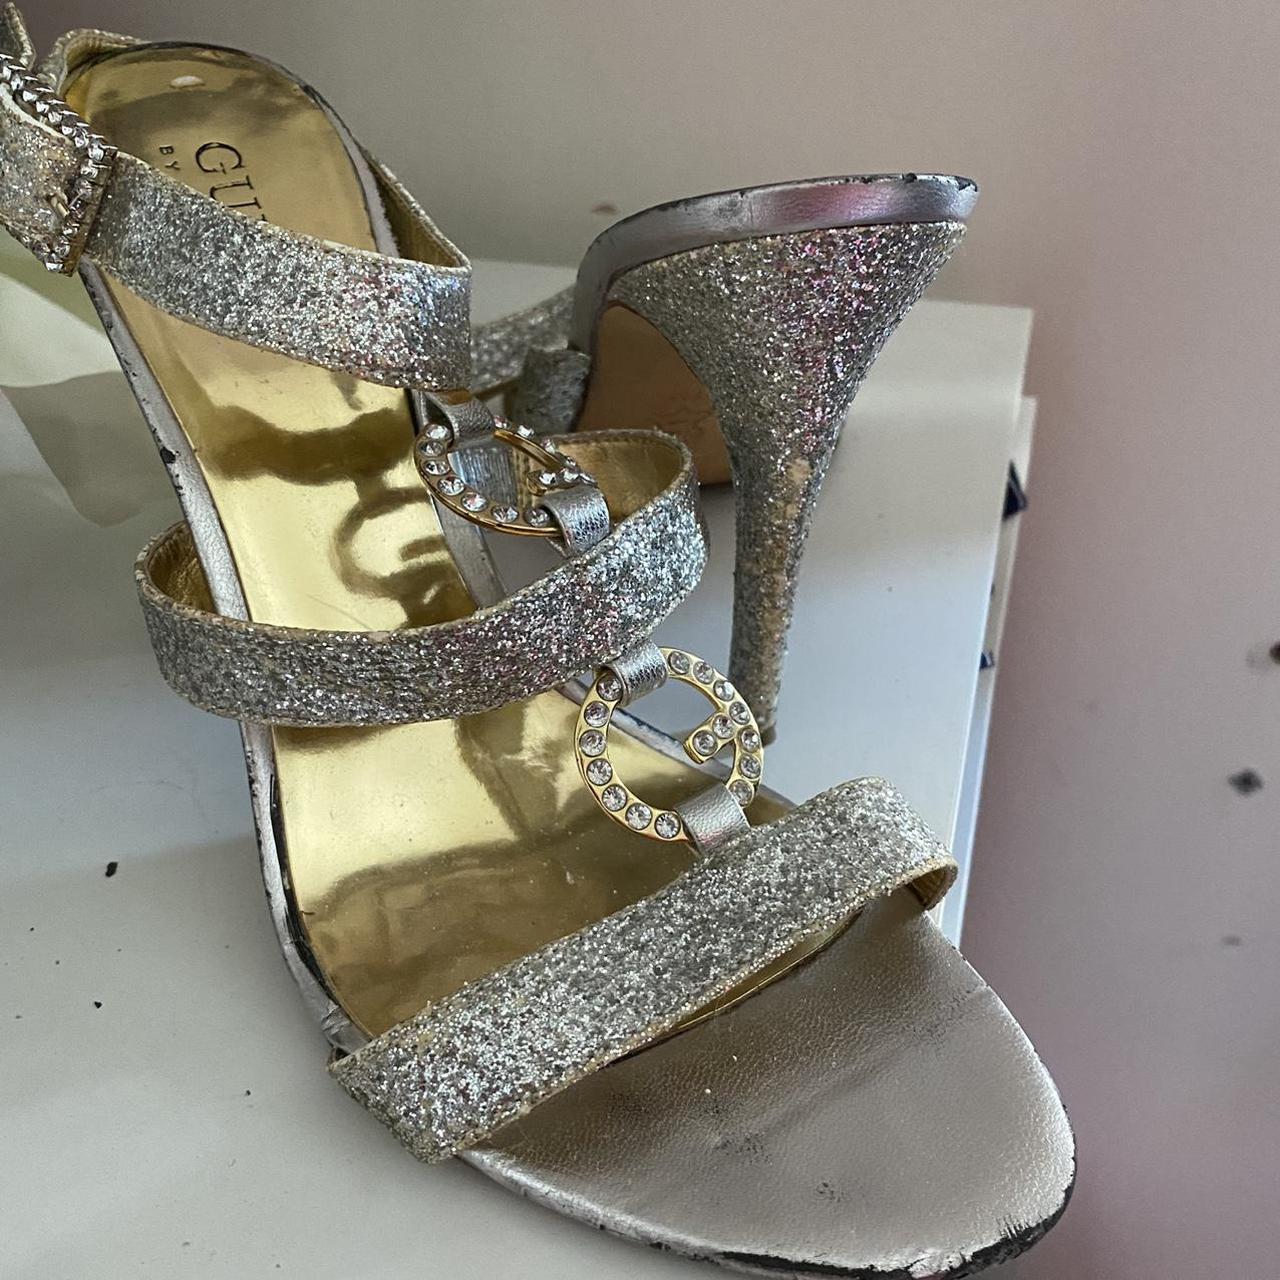 Product Image 4 - Vintage guess heels💗💗💗😭
Size 7 
Gold